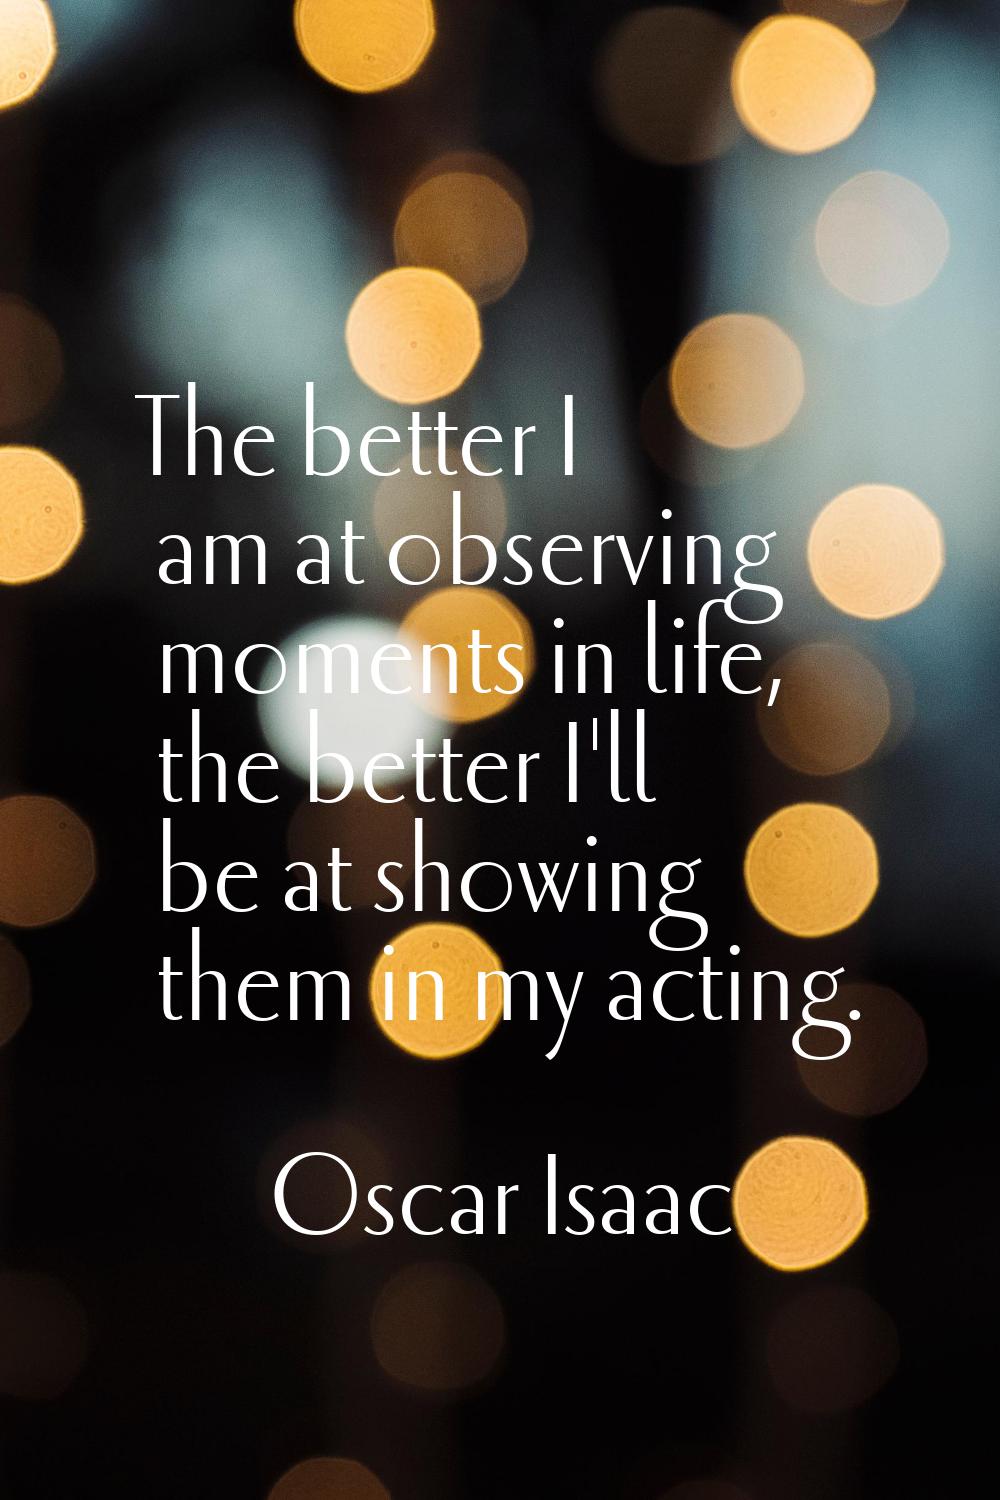 The better I am at observing moments in life, the better I'll be at showing them in my acting.